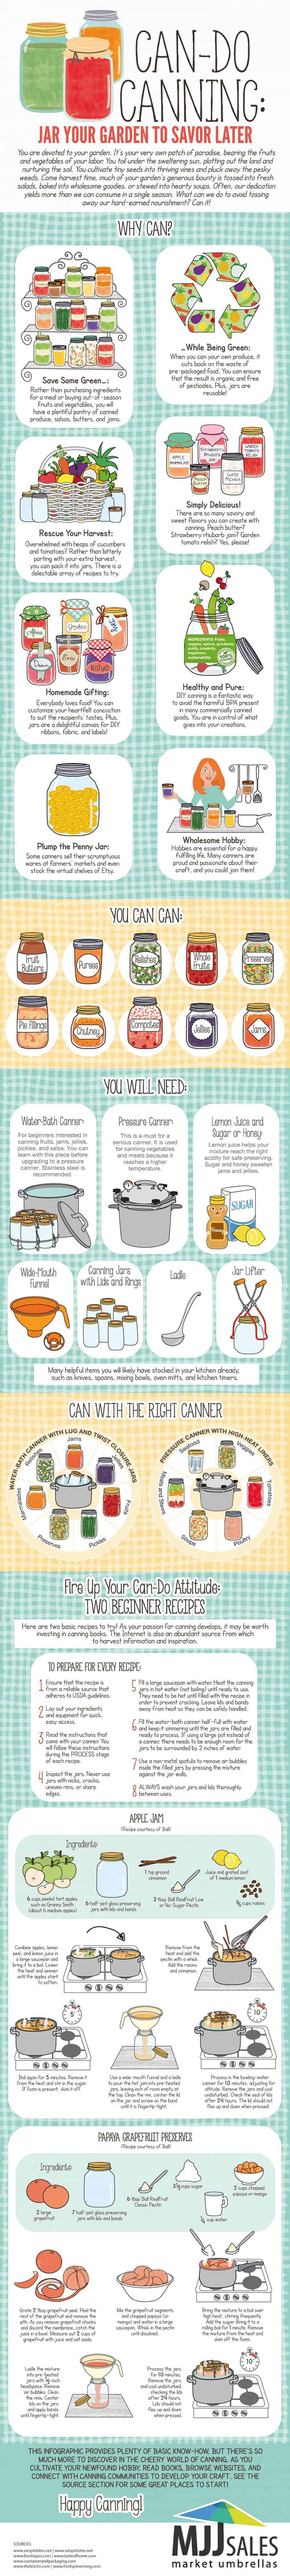 Infographic on canning - 6 reasons to jar your garden and 2 simple recipes